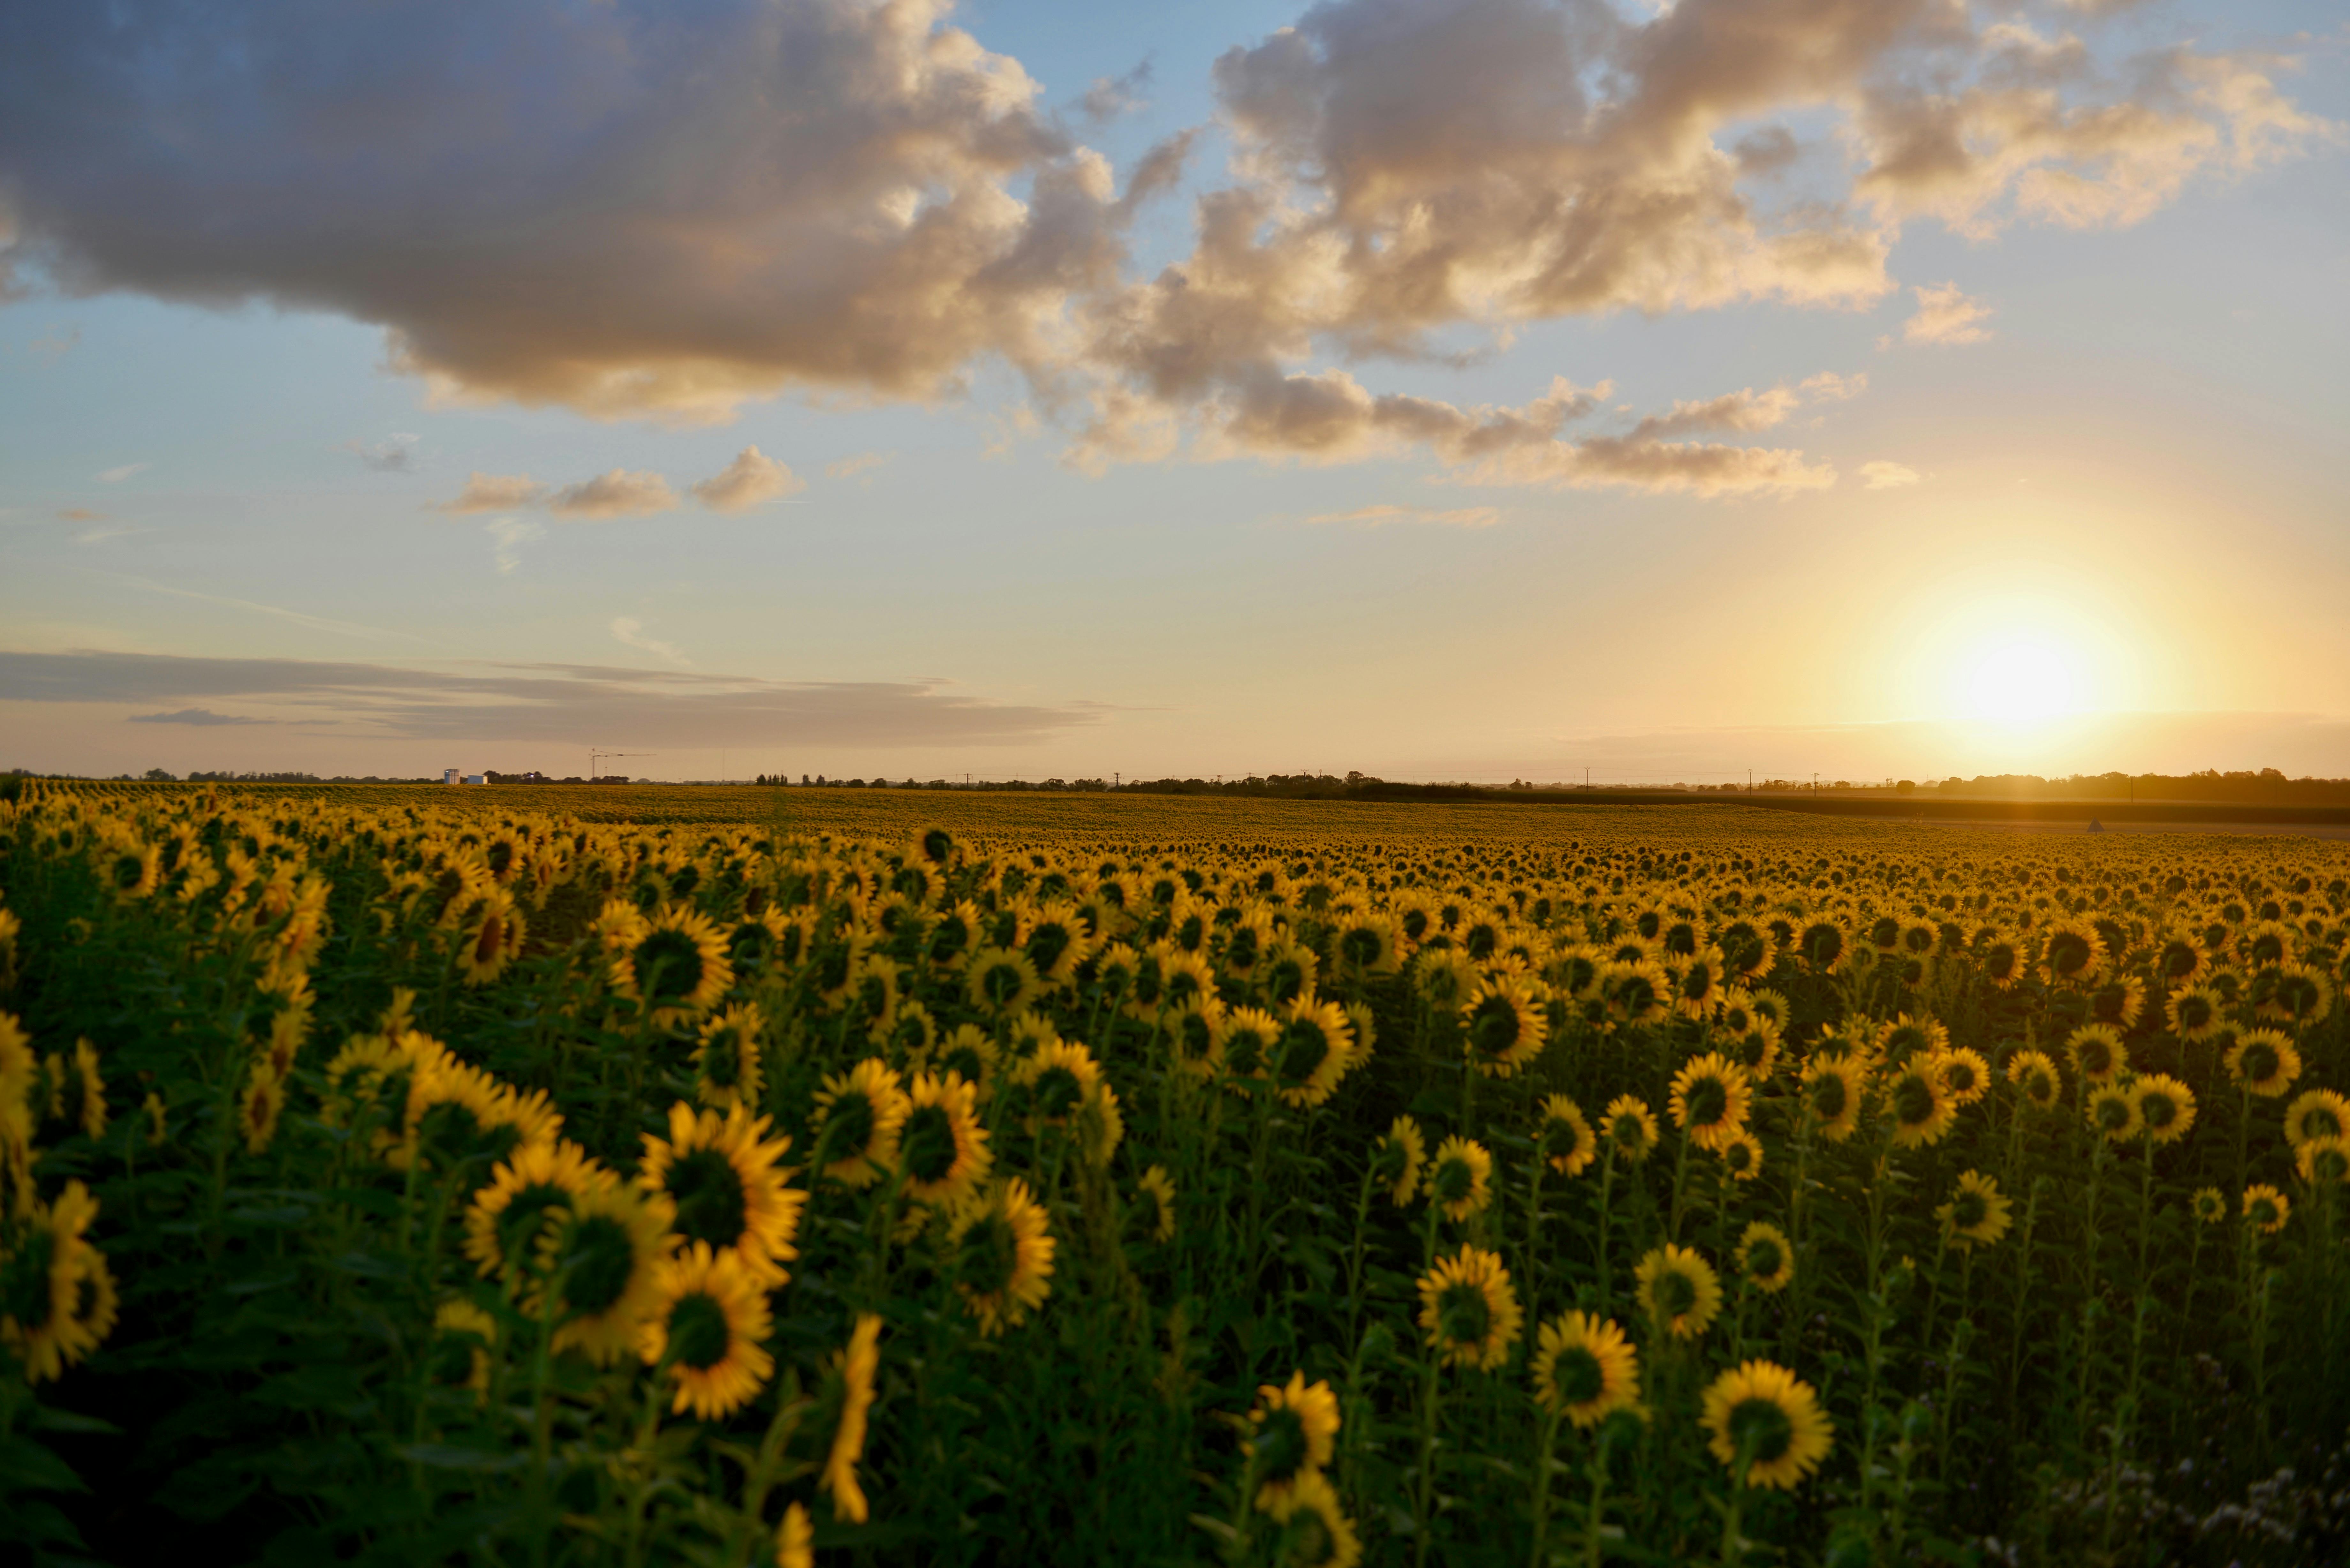 Landscape Photography Of Sunflower Field During Sunset · Free Stock Photo